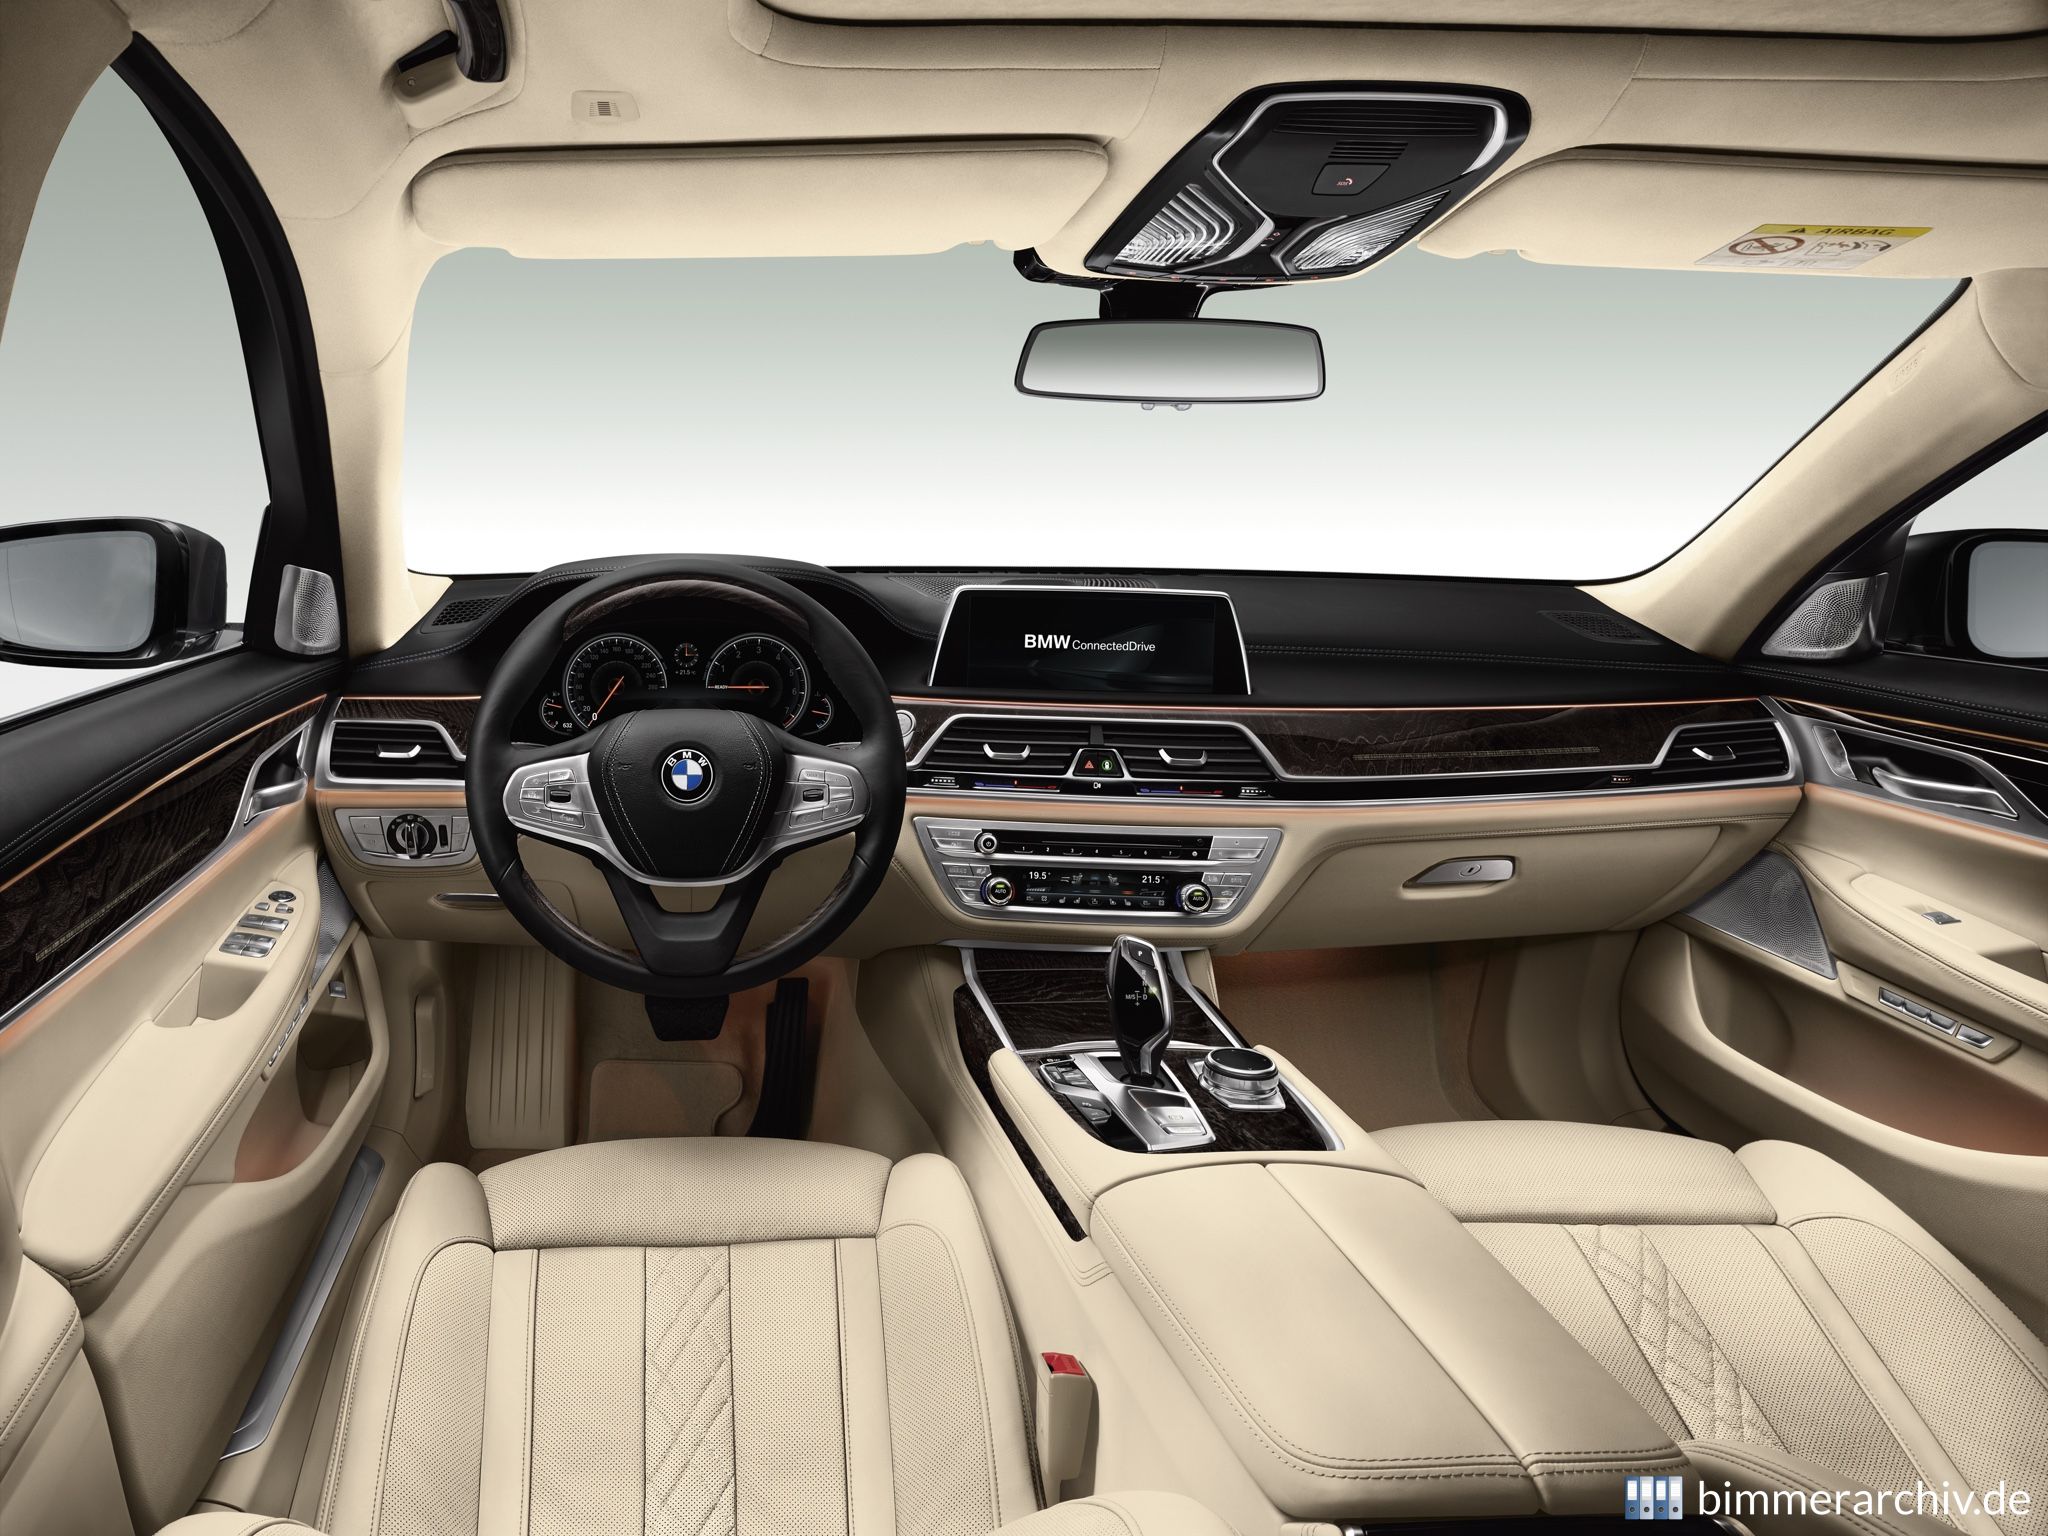 Model Archive for BMW models · BMW 7 Series - Interior · bmwarchive.org